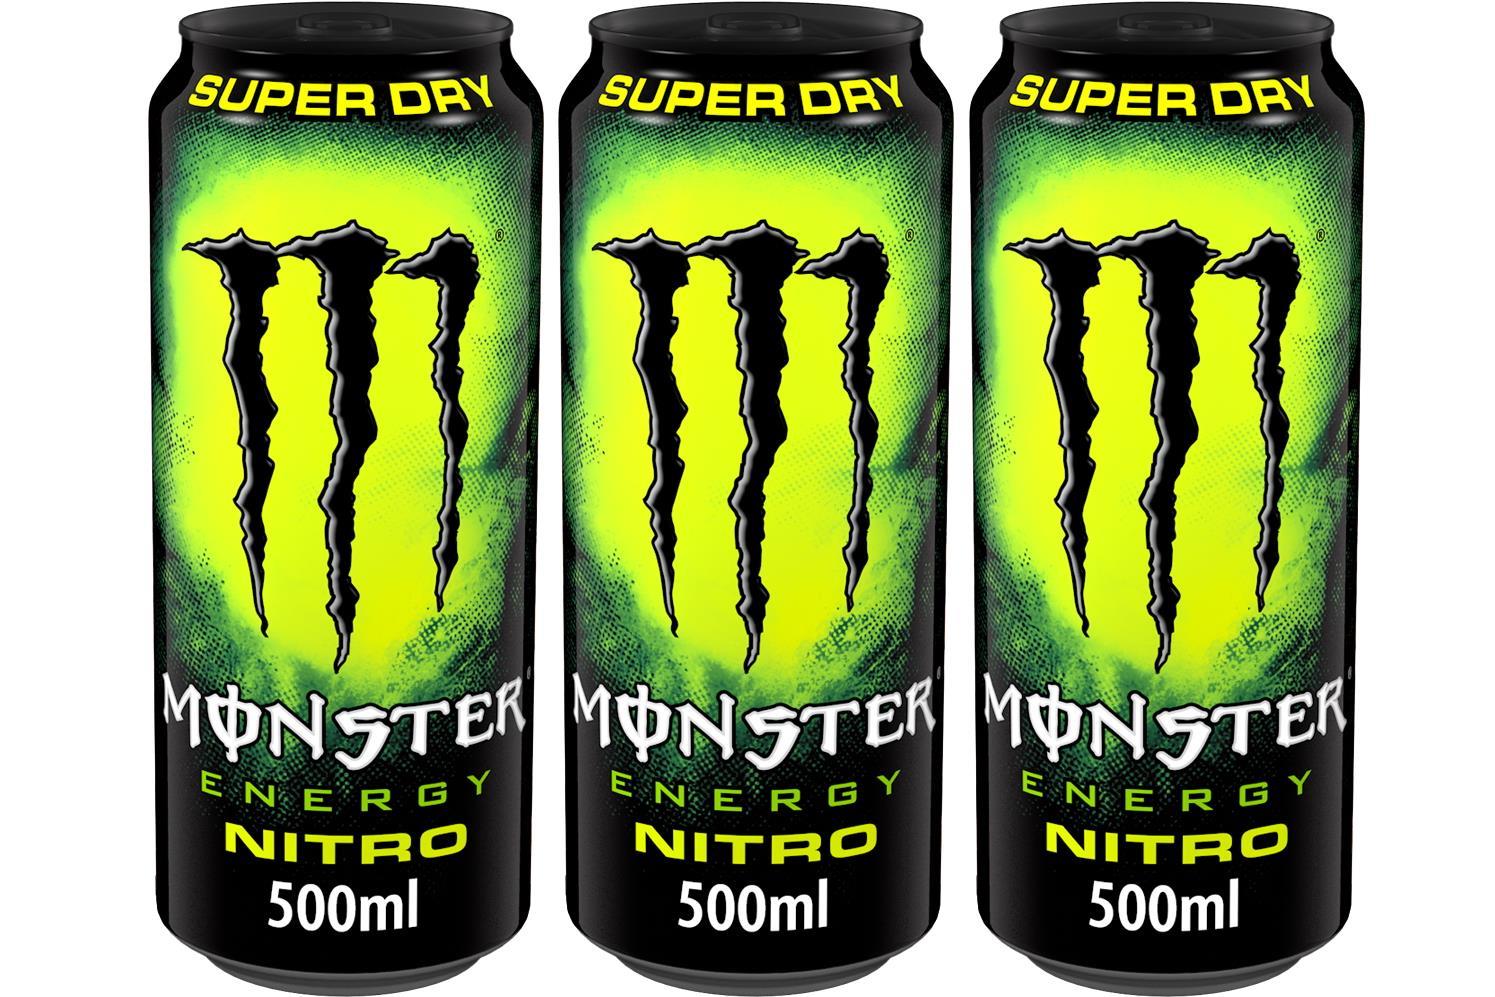 Monster adds 'Nitro' energy drink to lineup | News | The Grocer